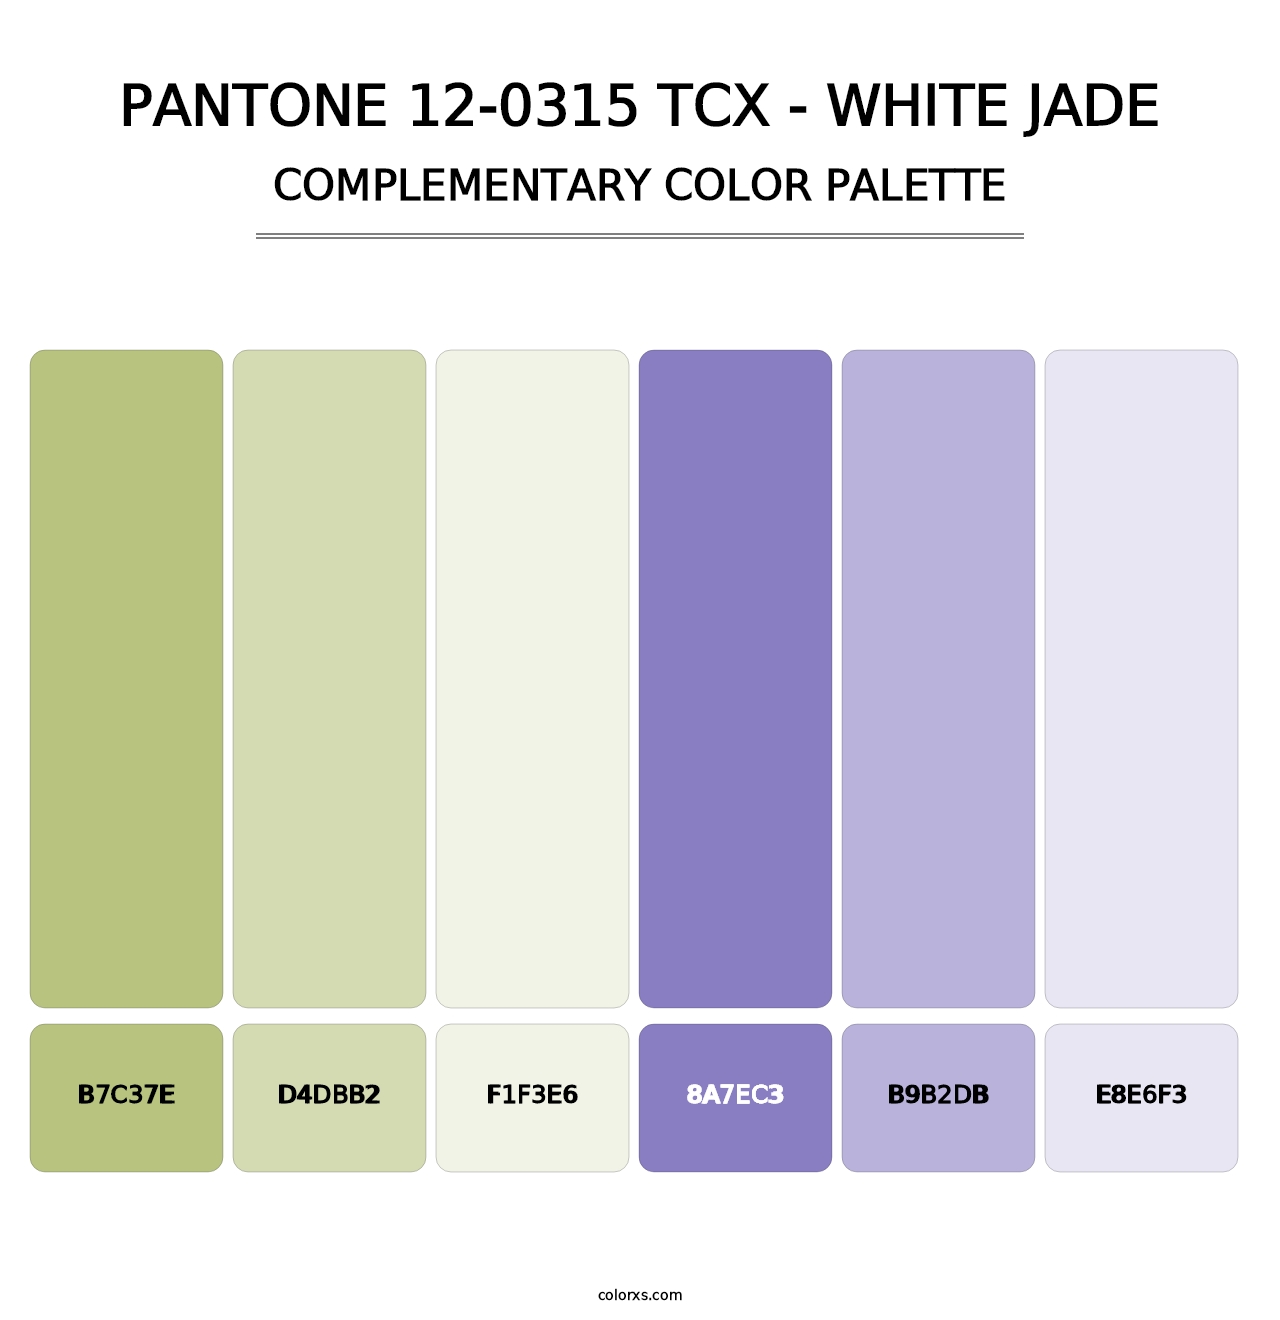 PANTONE 12-0315 TCX - White Jade - Complementary Color Palette